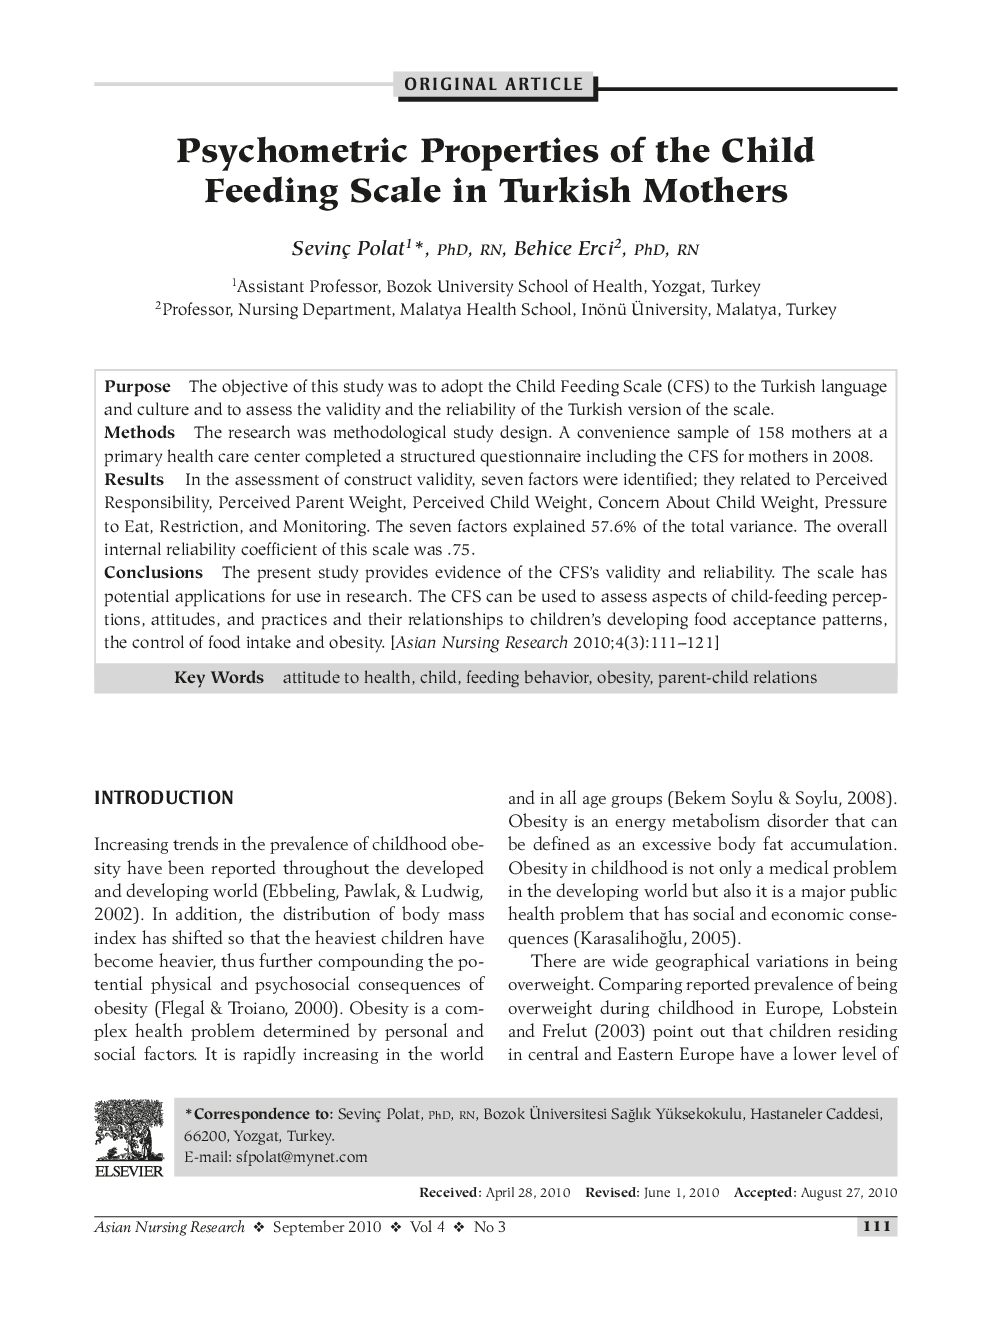 Psychometric Properties of the Child Feeding Scale in Turkish Mothers